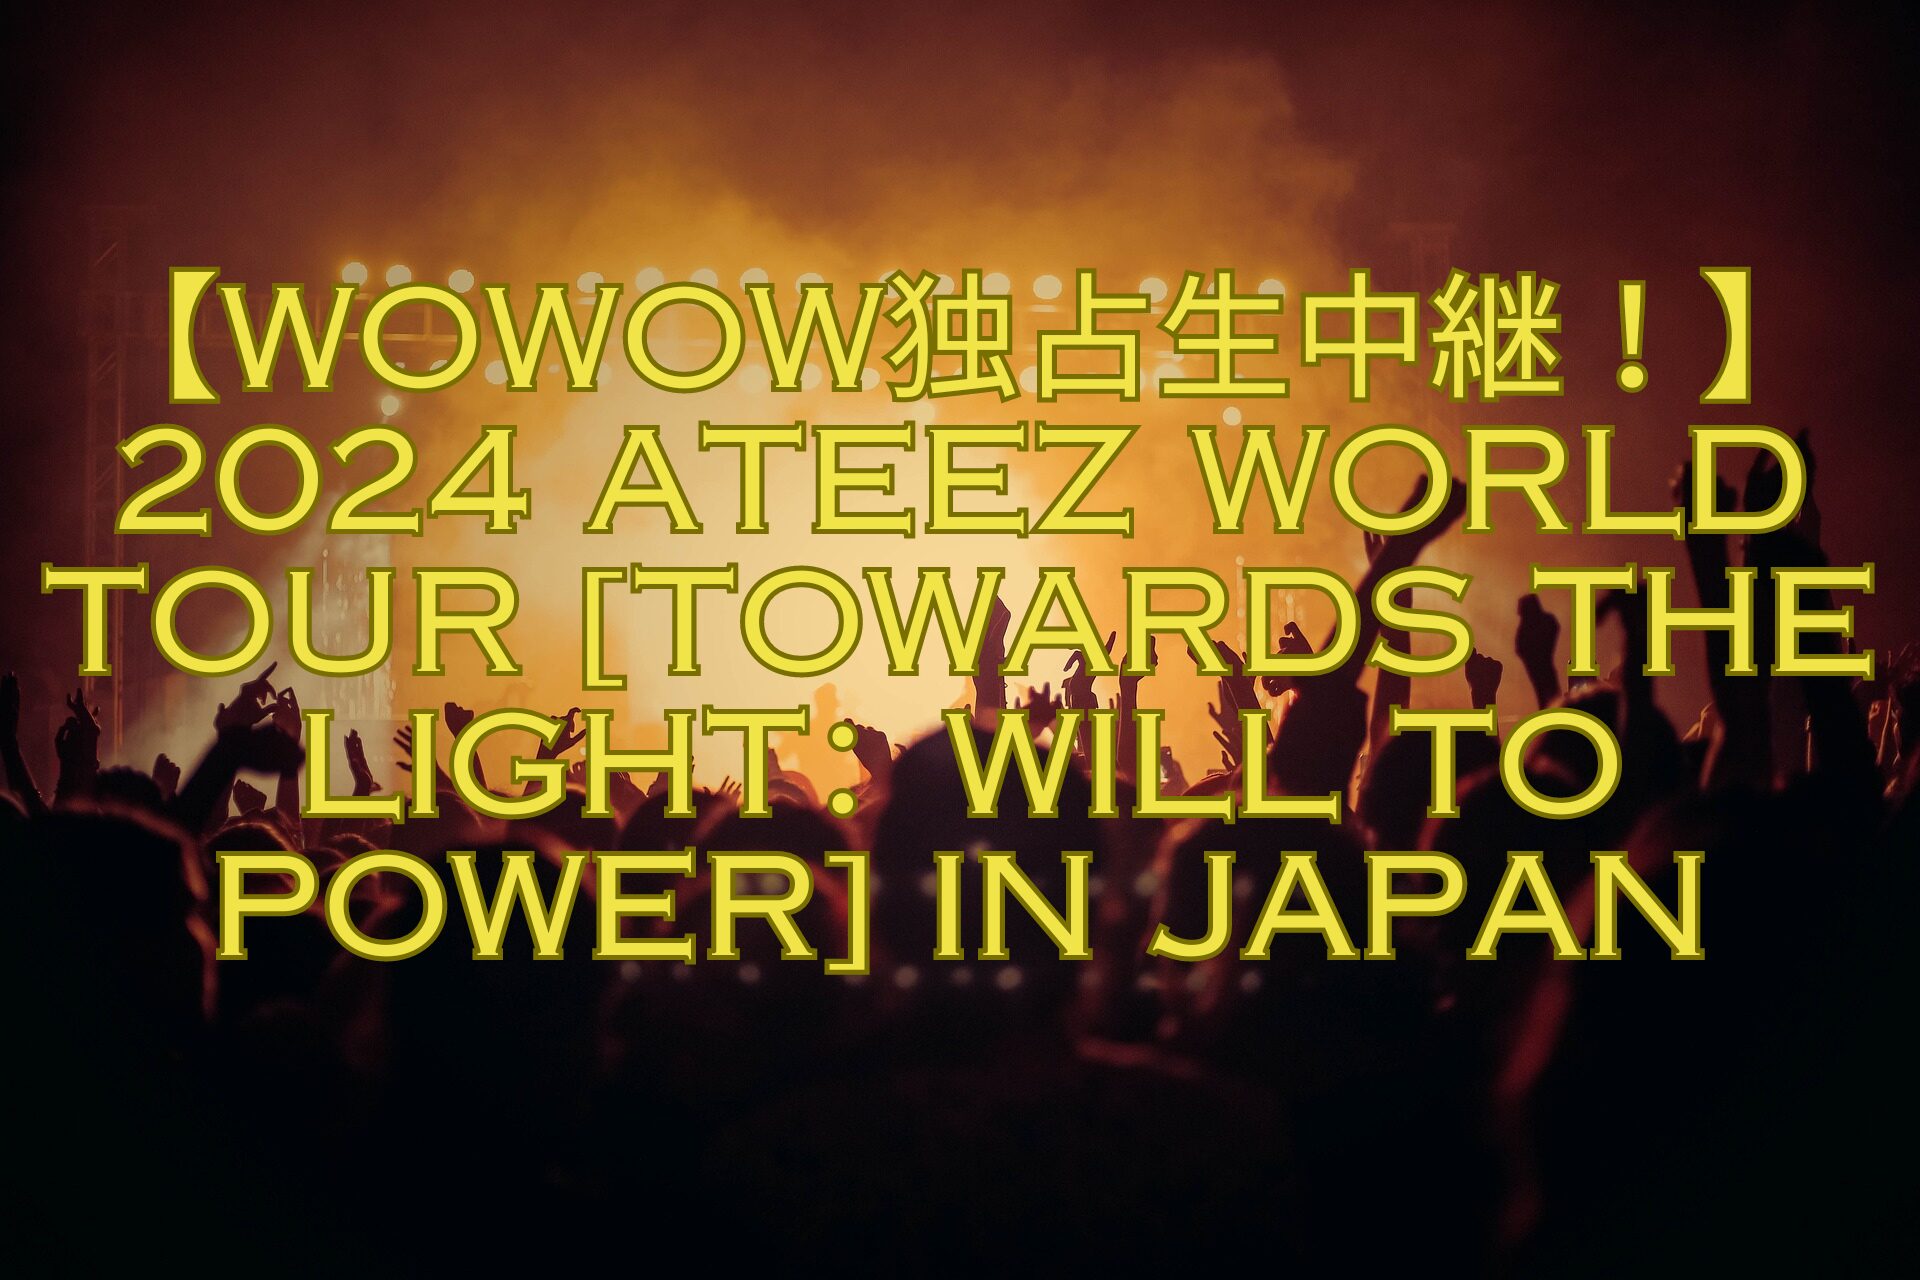 【WOWOW独占生中継！】2024-ATEEZ-WORLD-TOUR-TOWARDS-THE-LIGHT：WILL-TO-POWER-IN-JAPAN